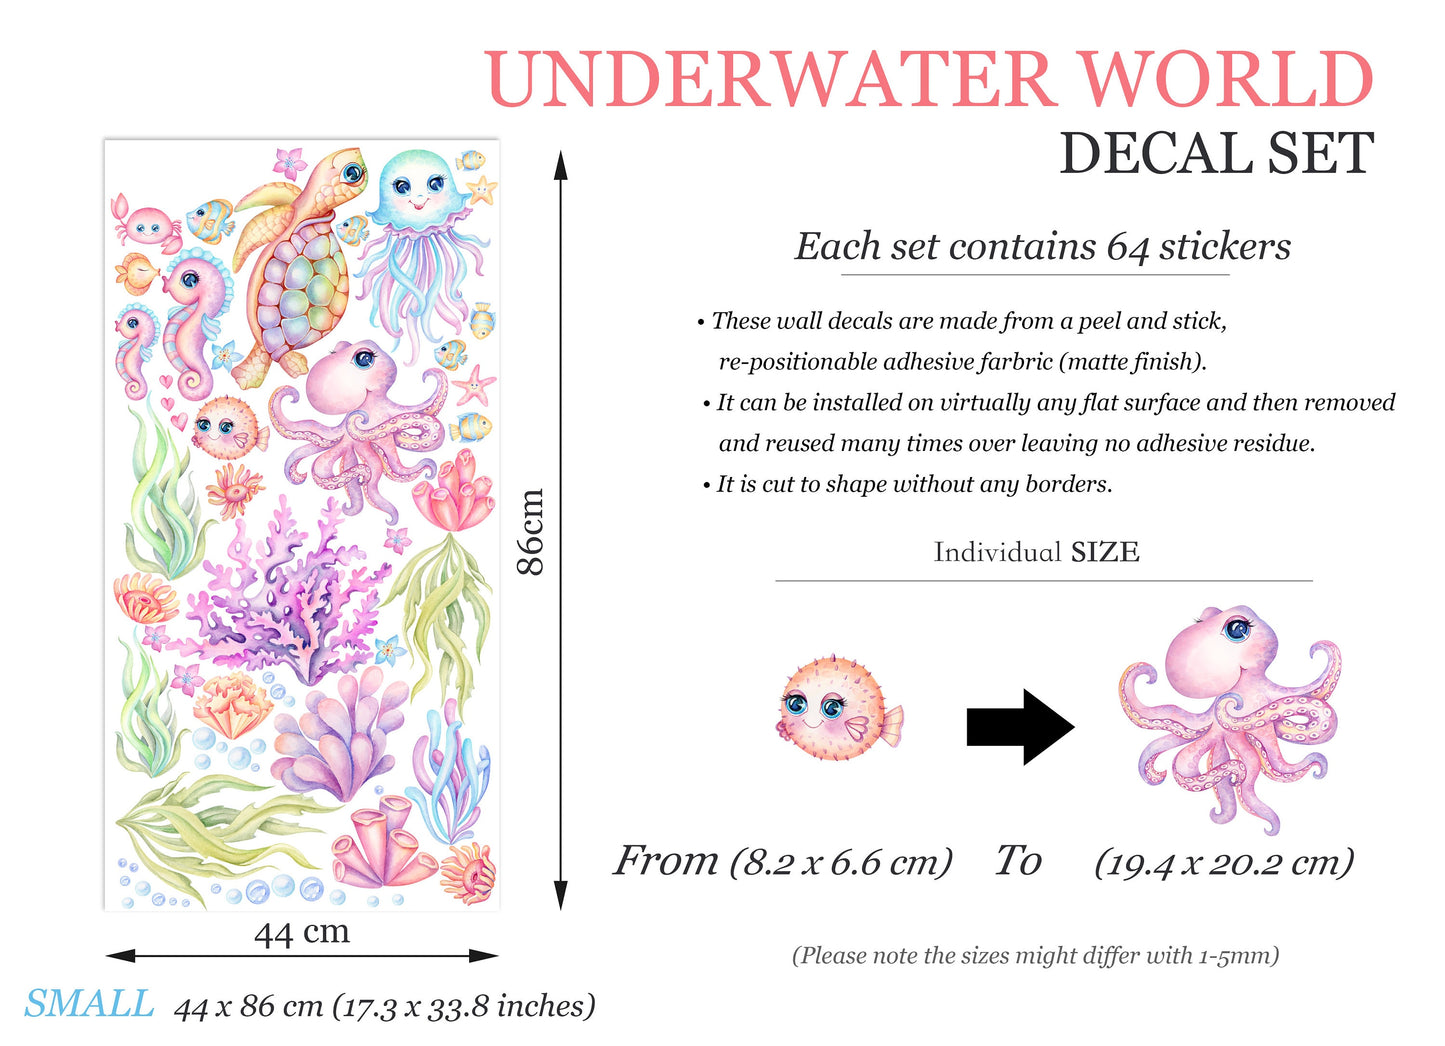 Pink and Blue Underwater World Cartoon Wall Decal - Happy Marine Life for Girls' Room - BR308